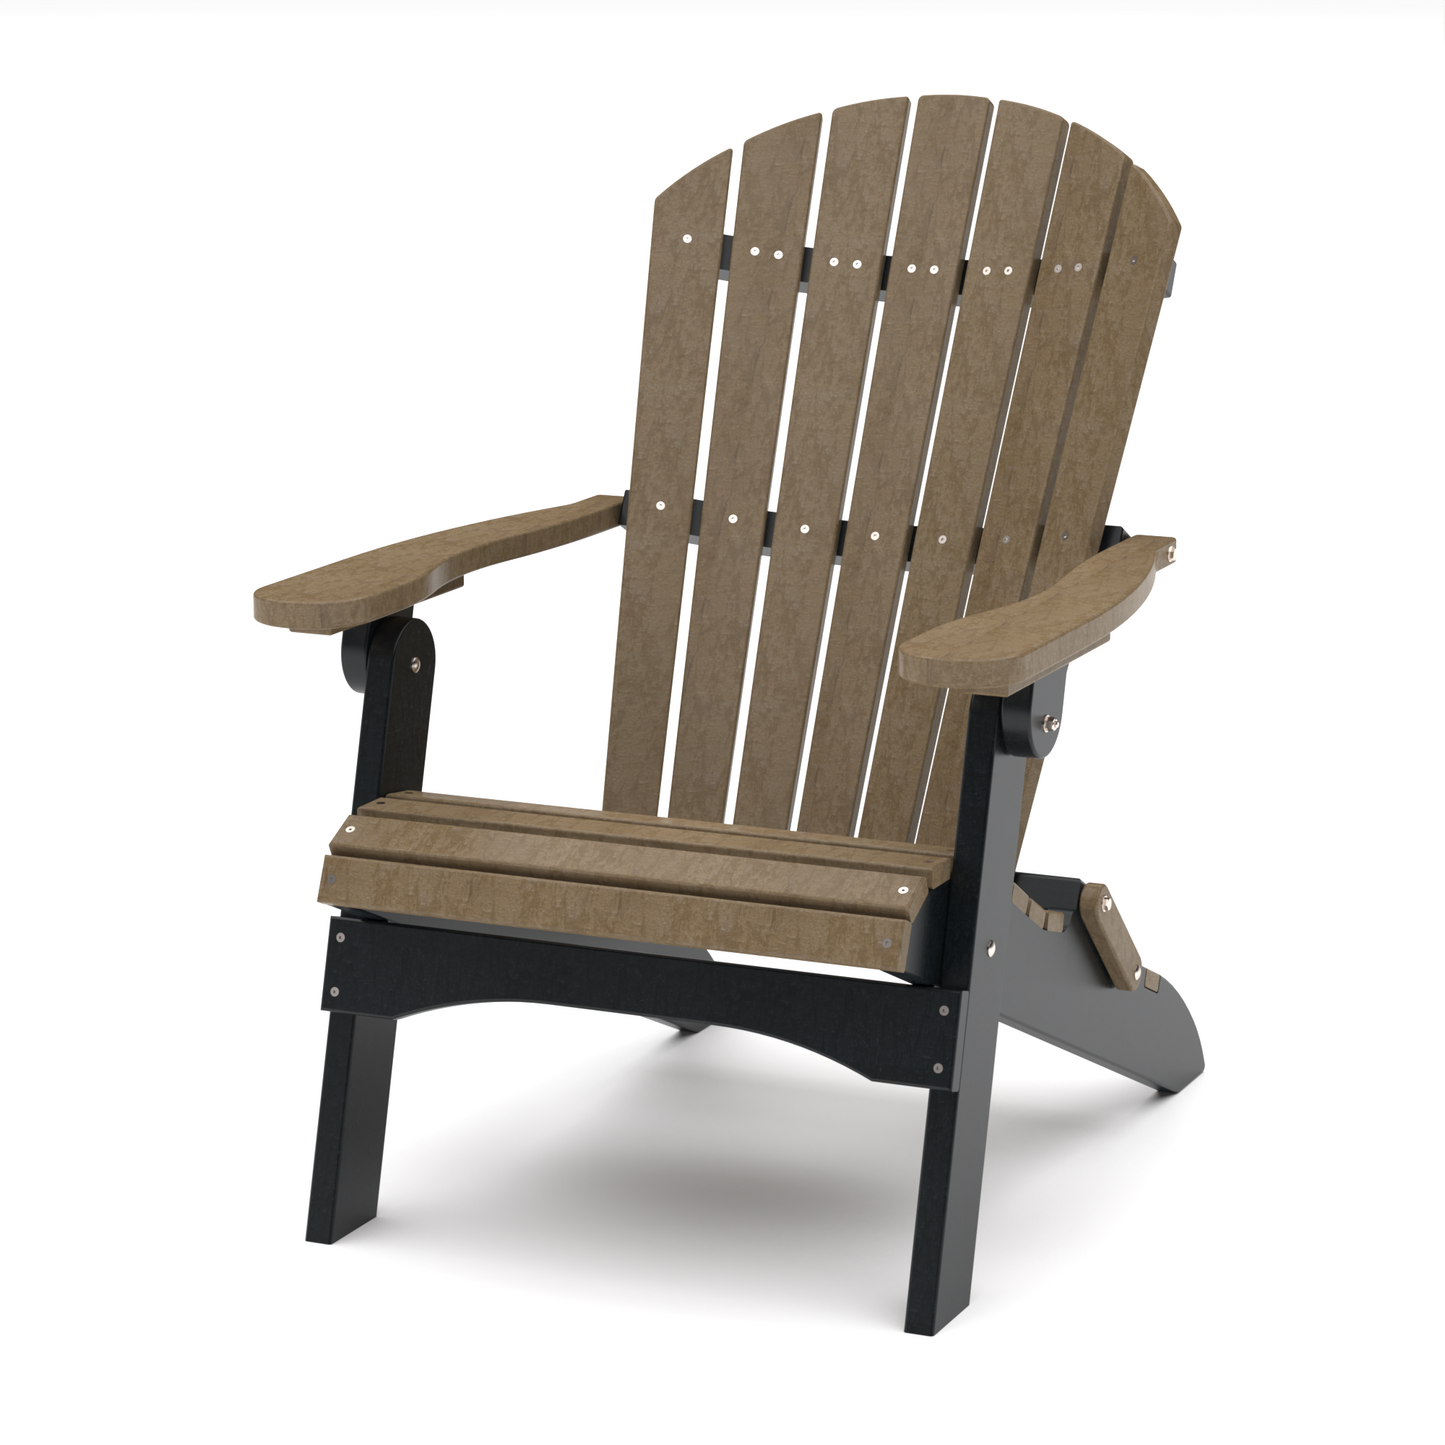 Wildridge Heritage Recycled Plastic Folding Adirondack Chair (QUICK SHIP) - LEAD TIME TO SHIP 3 TO 4 BUSINESS DAYS